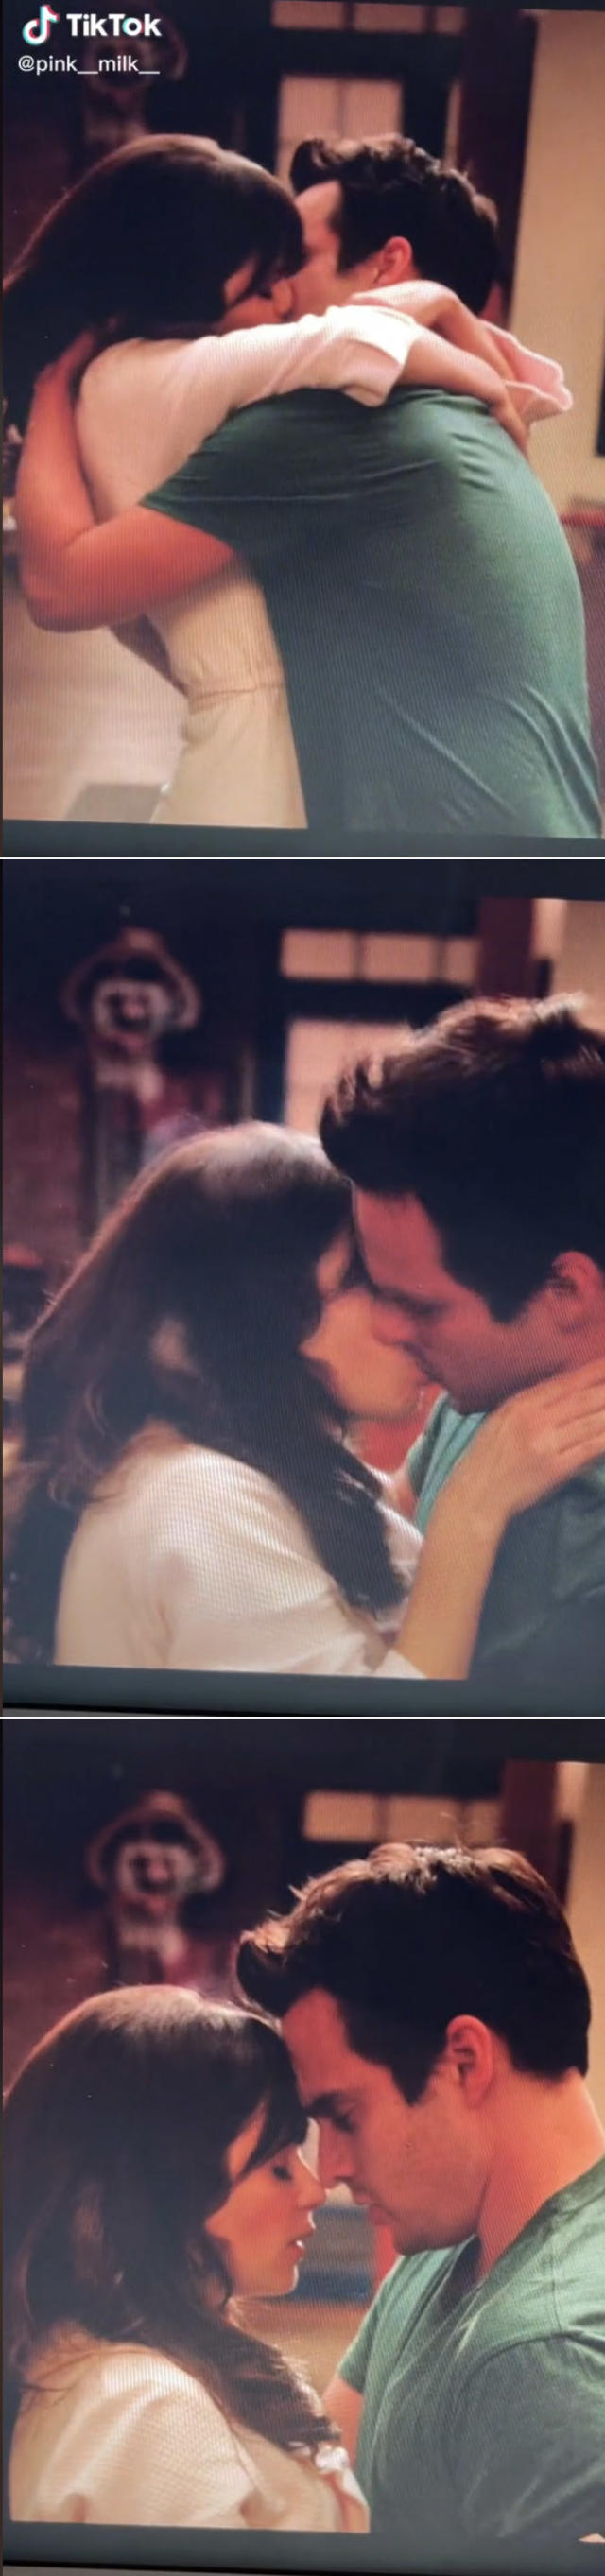 Watch Marianne and Connell's first kiss in this Normal People clip